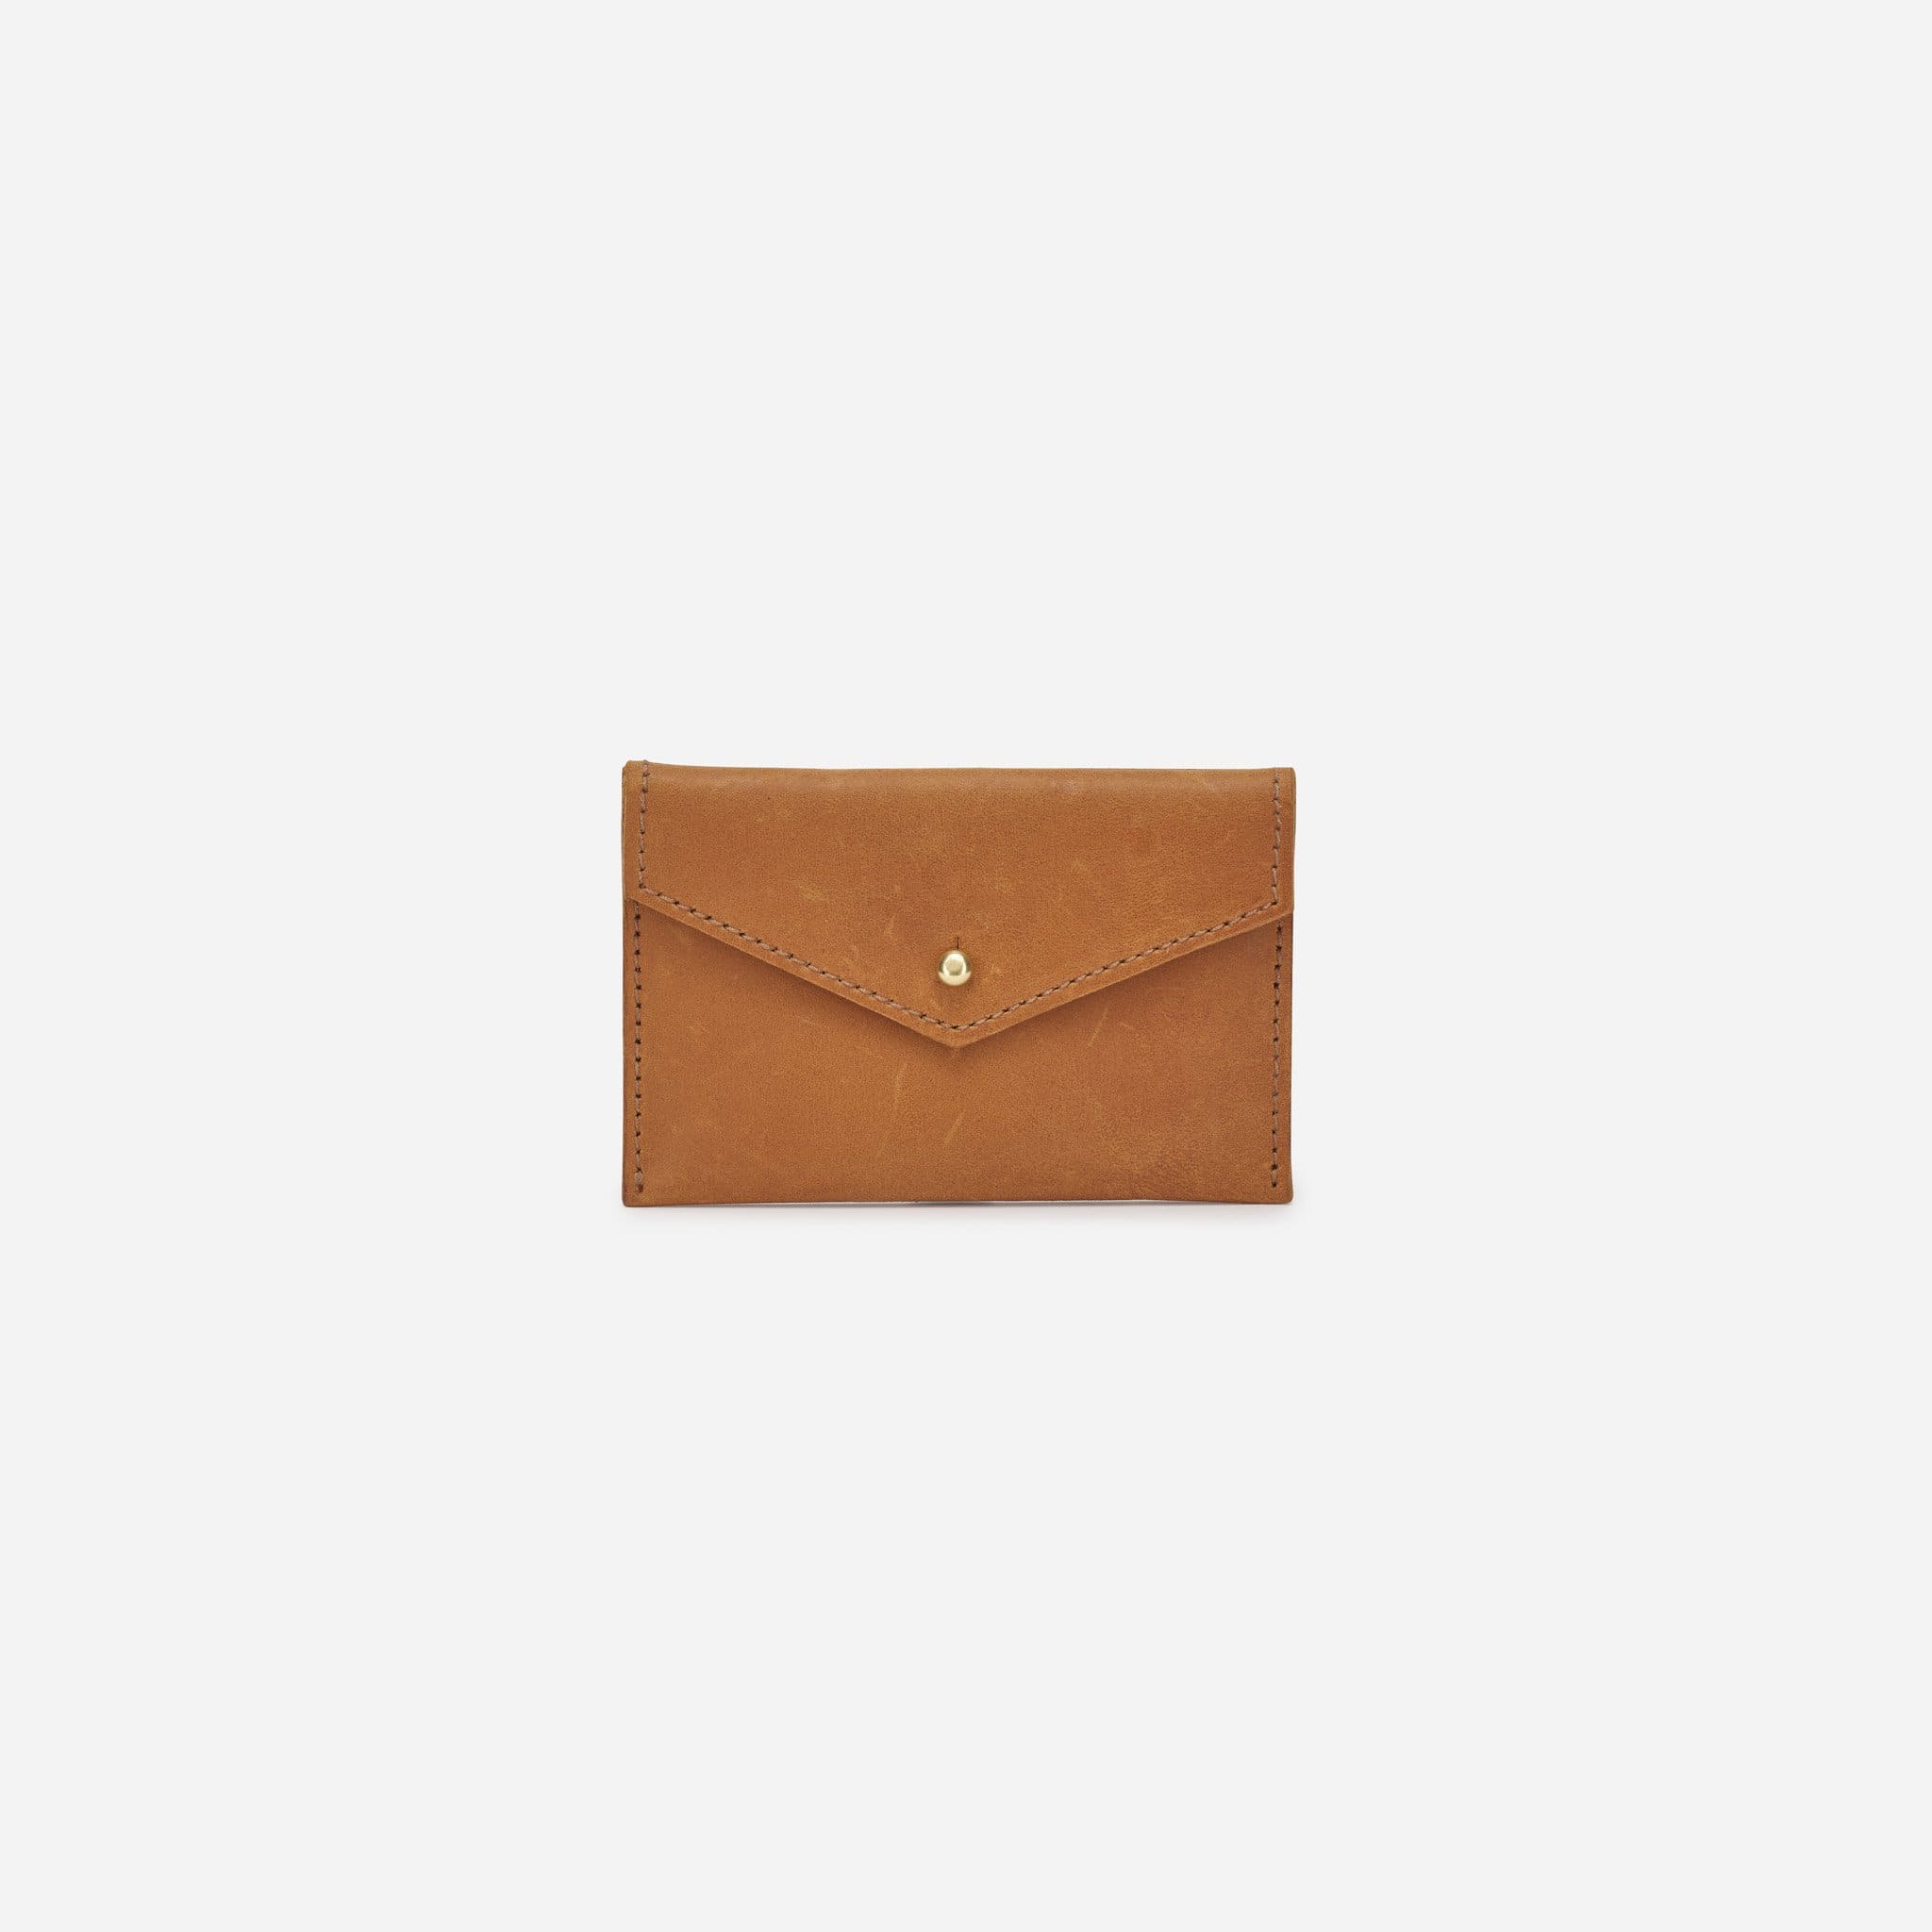 Ethically Crafted Sustainable Leather / Tigi Womens Card Wallet / Black / Genuine Full Grain Leather / Parker Clay / Certified B Corp